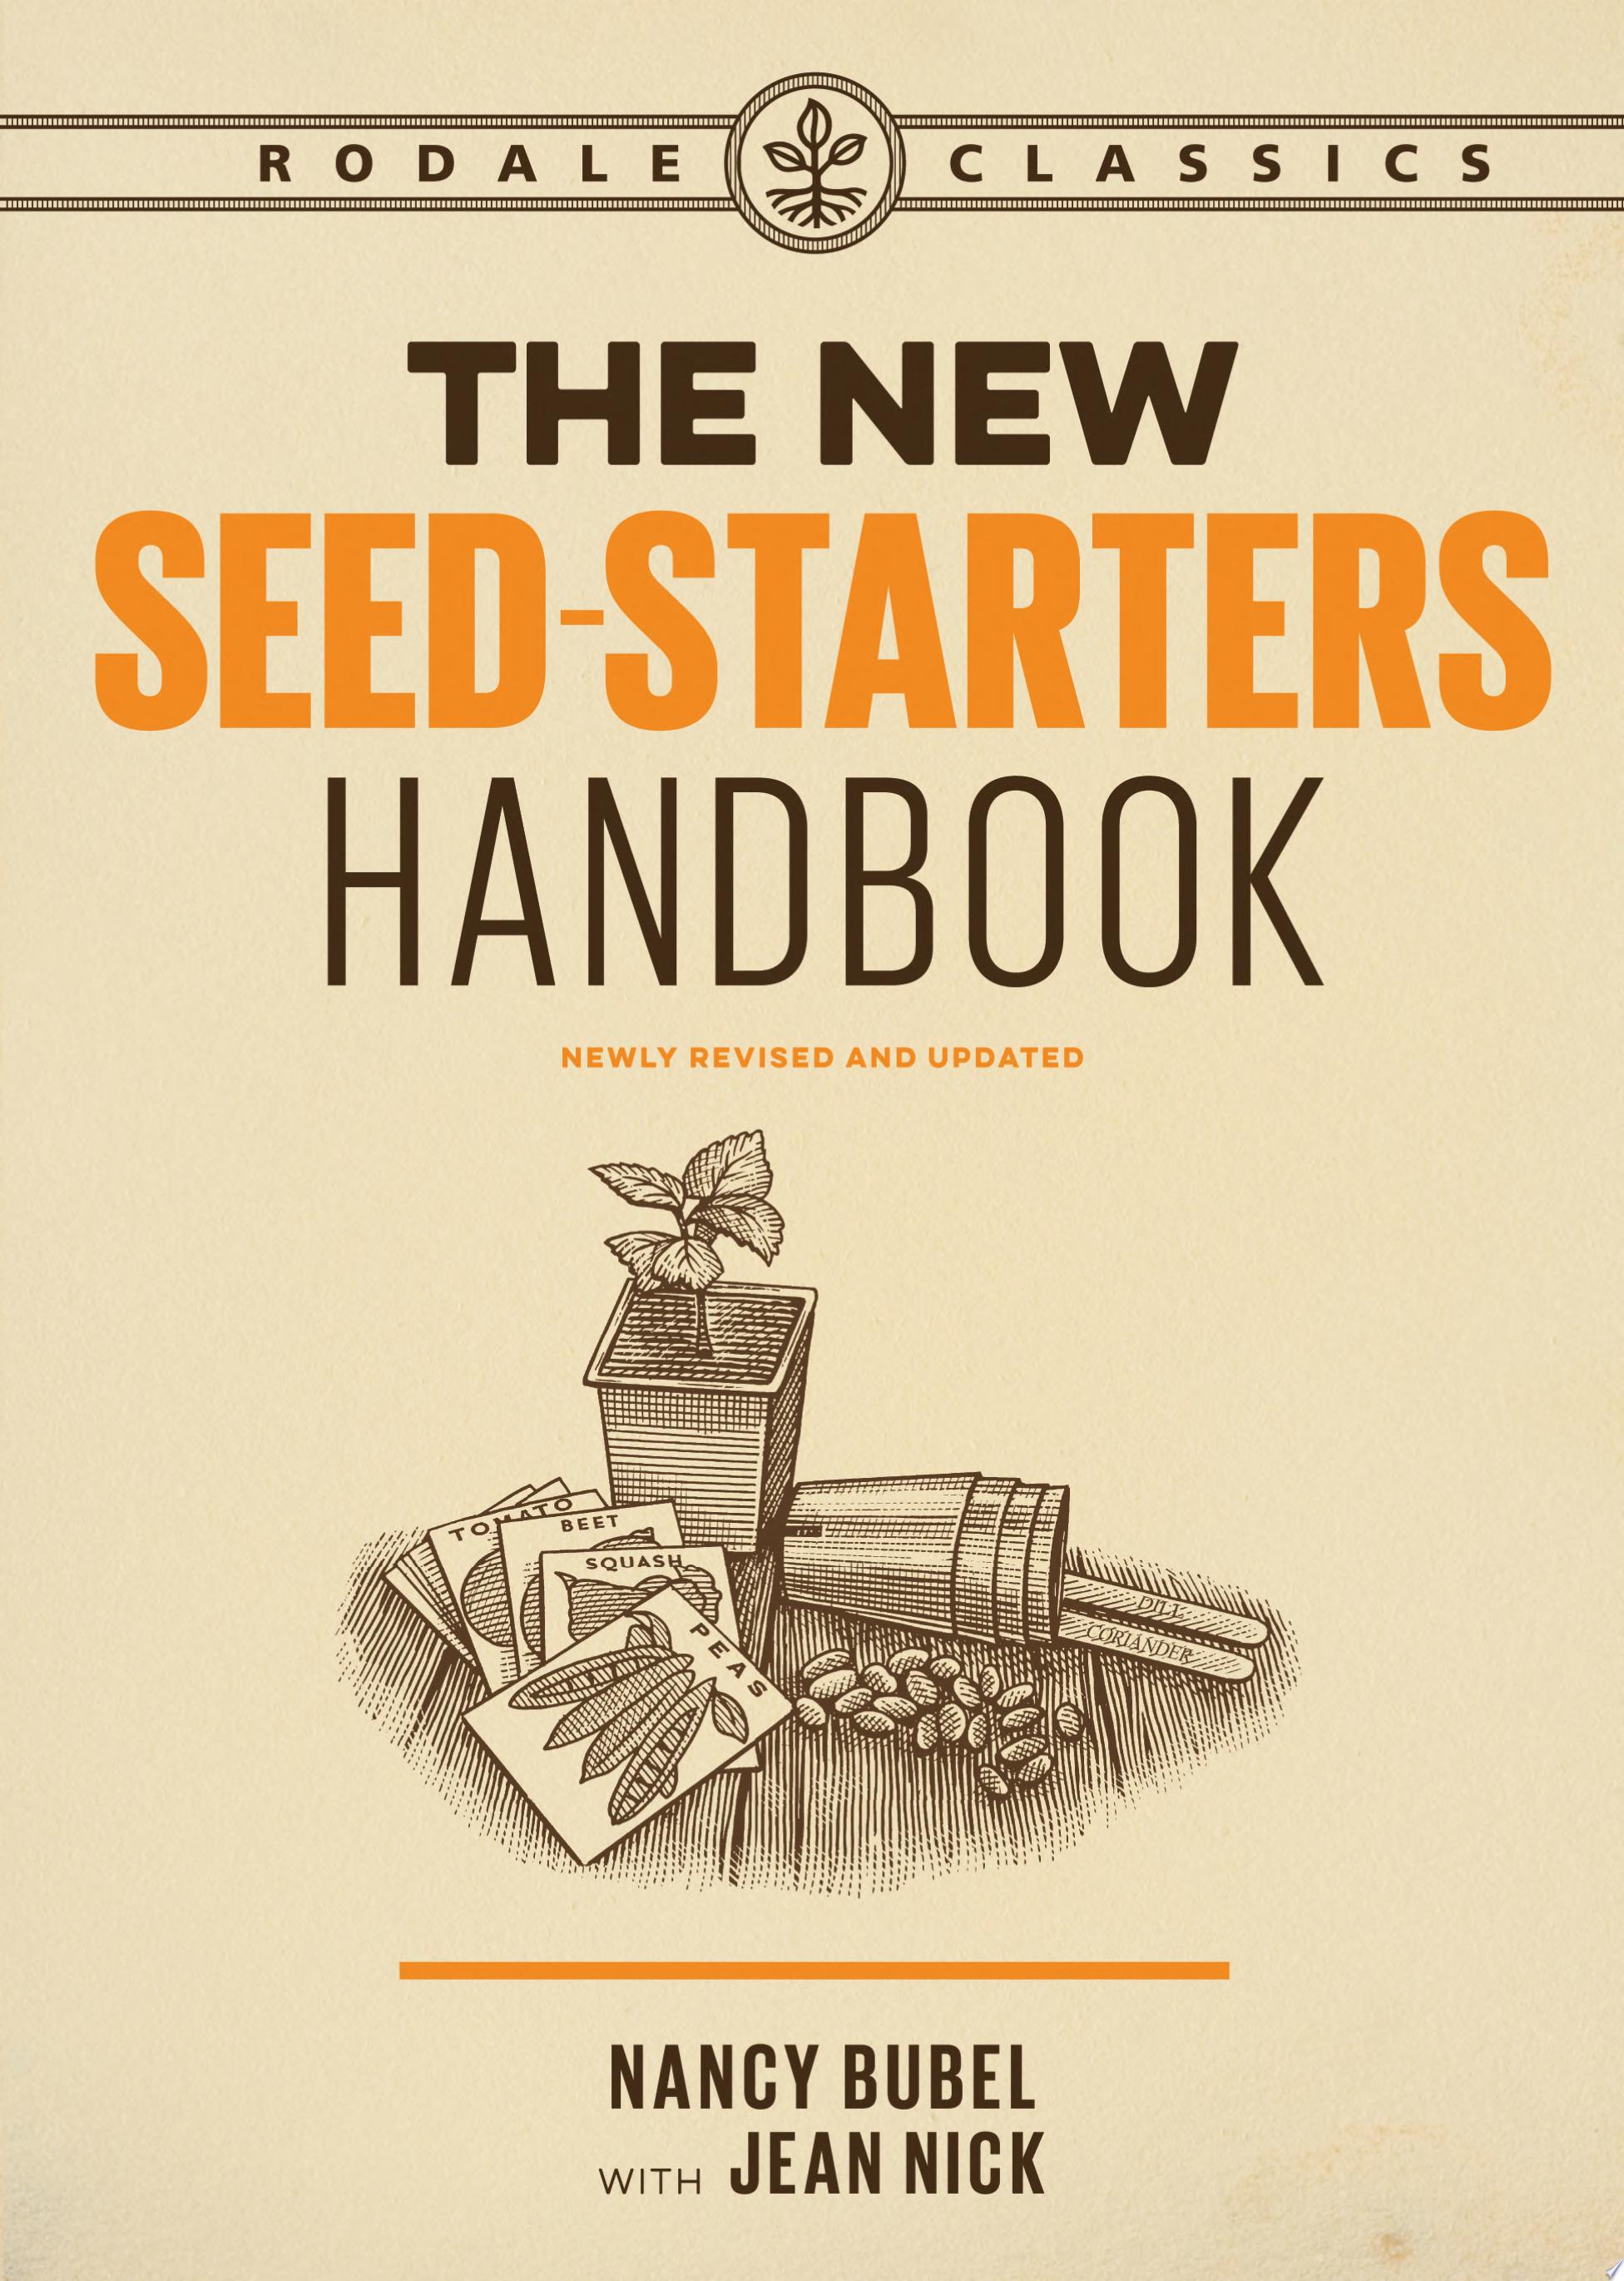 Image for "The New Seed-Starters Handbook"